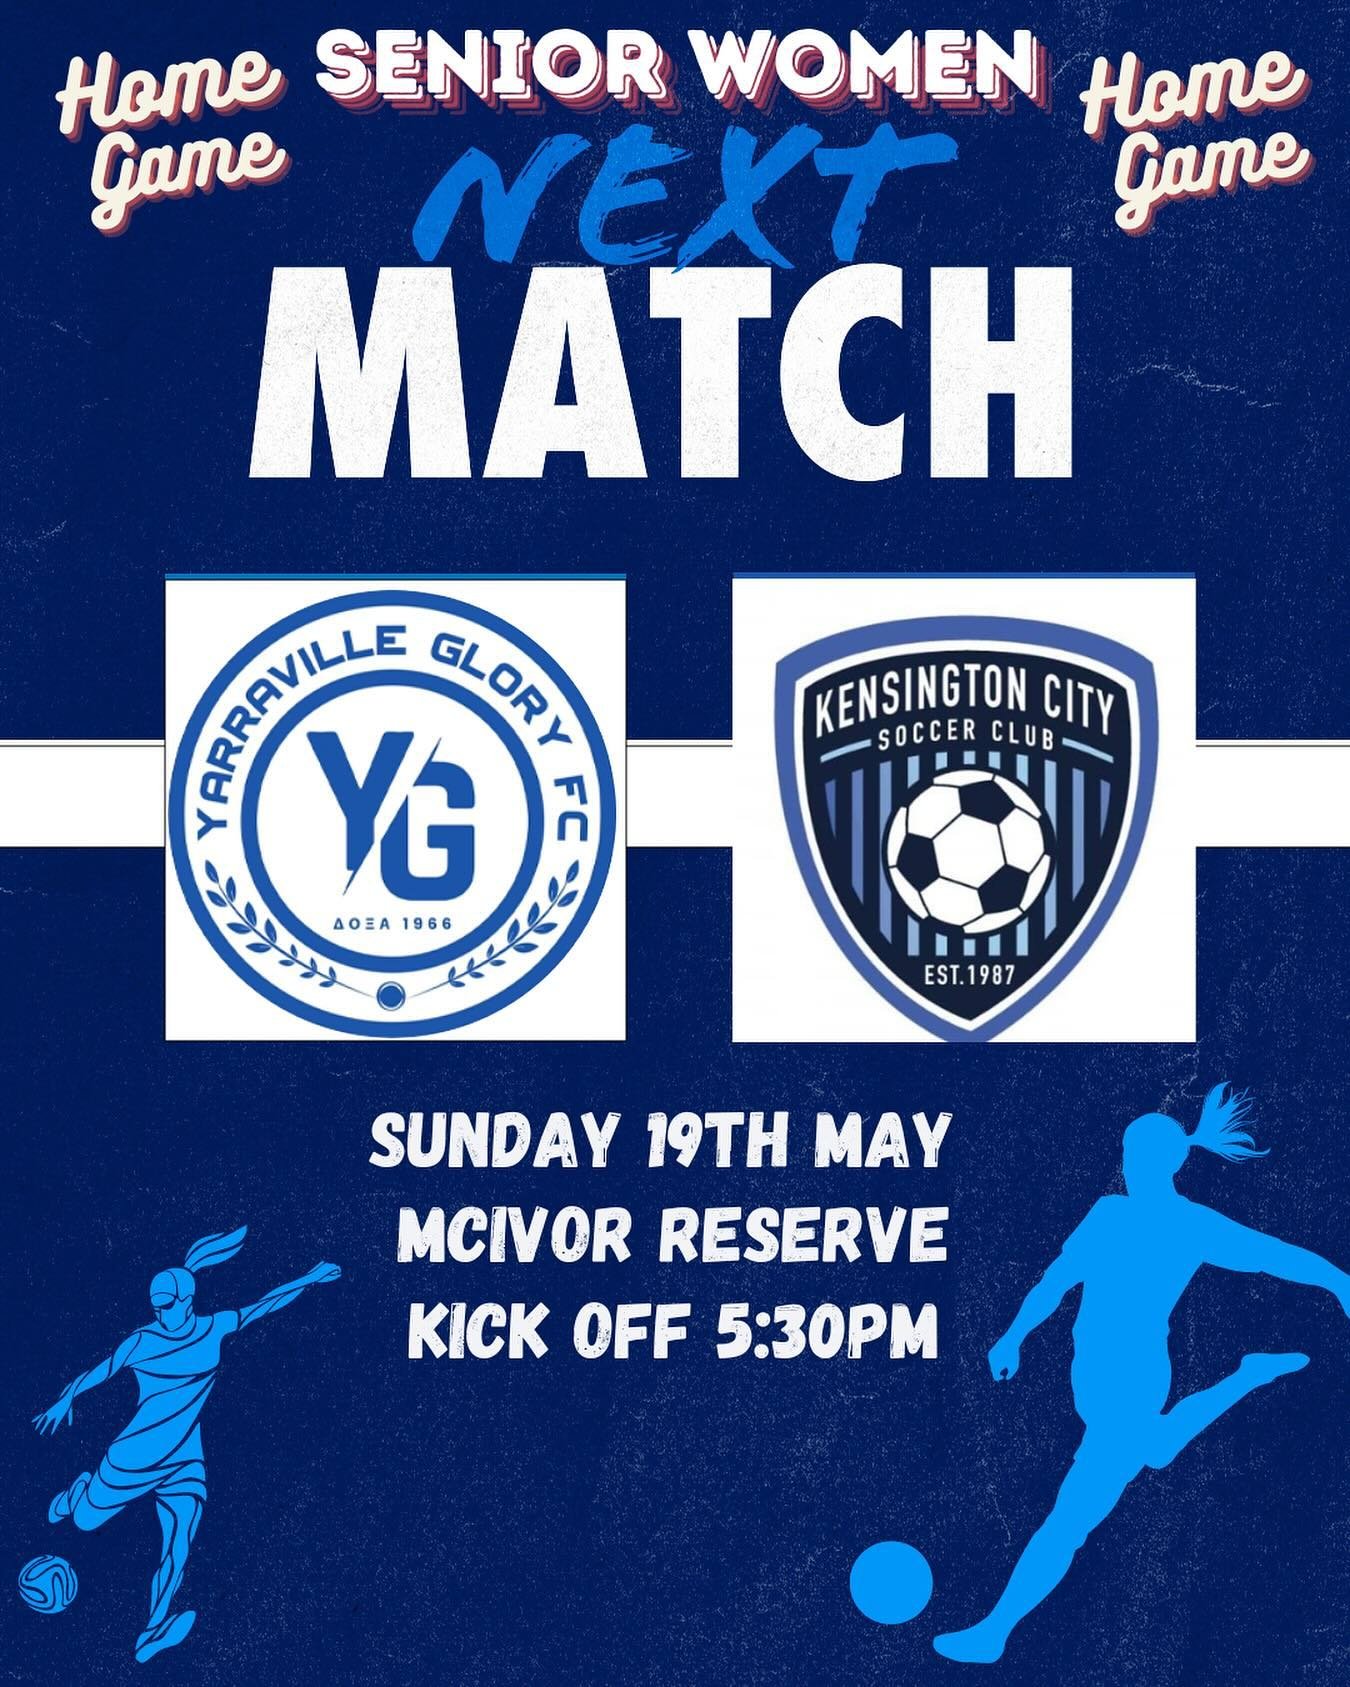 Our Senior women are back home this weekend playing Kensington City @5:30pm on Sunday #doxa #glory #ygfc